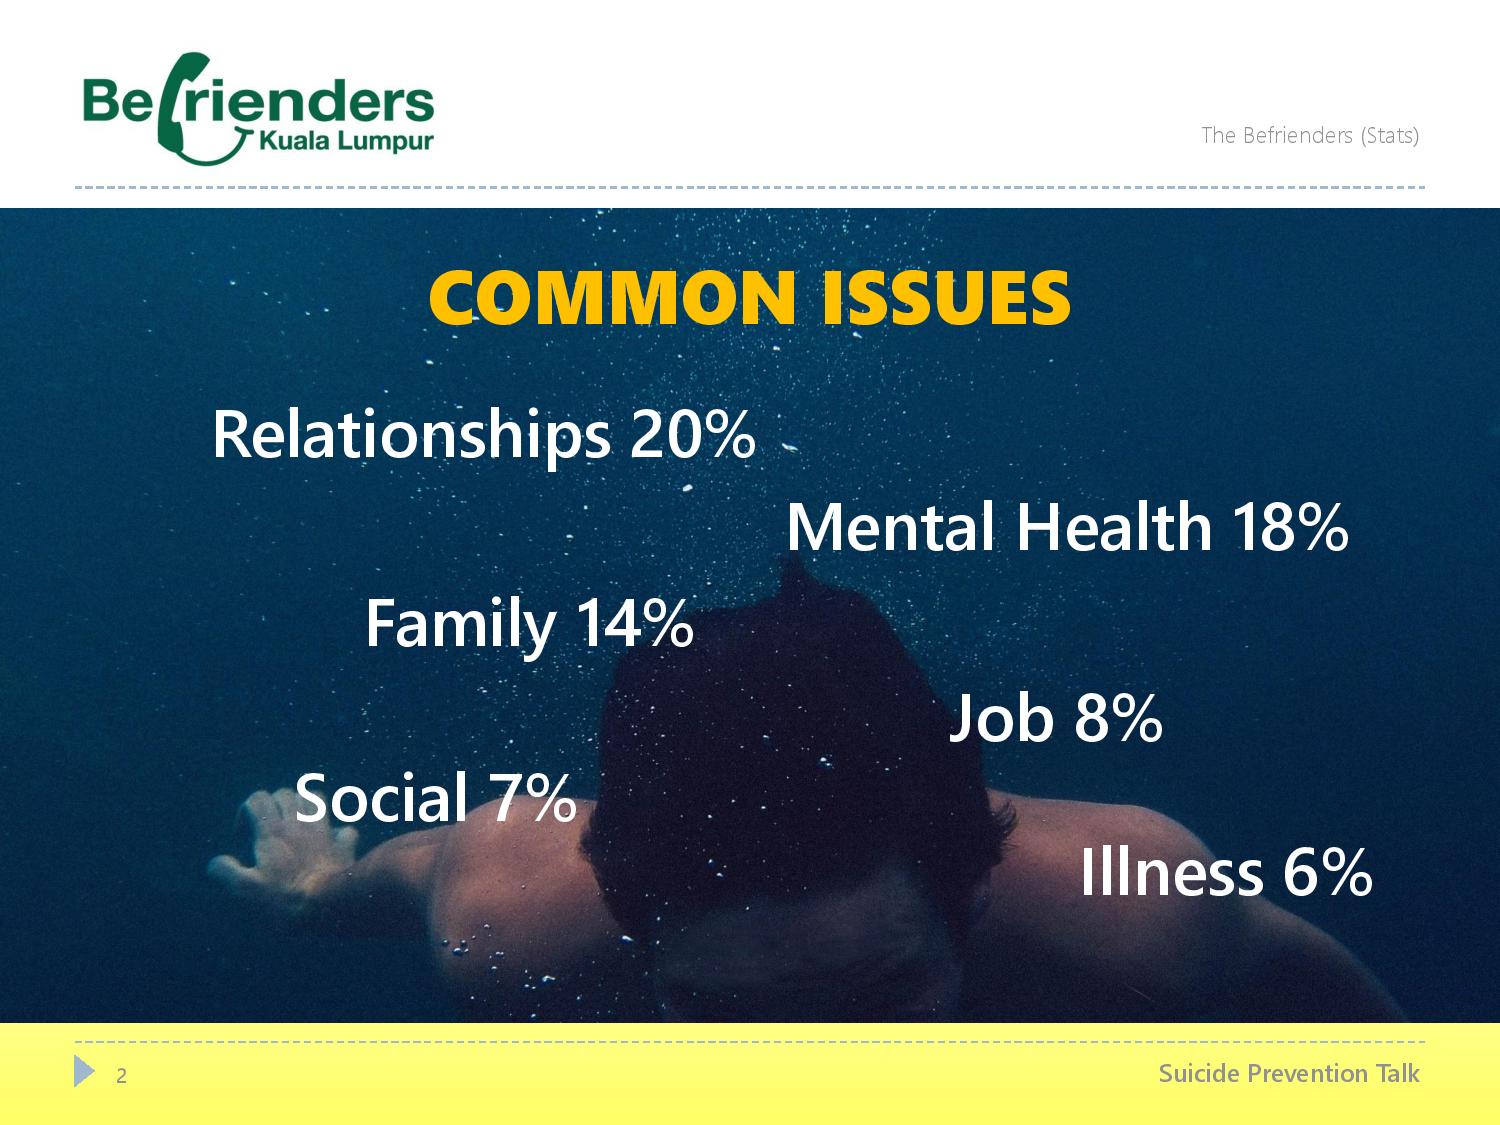 Speaking of statistics… these are the main reasons people call the Befrienders.